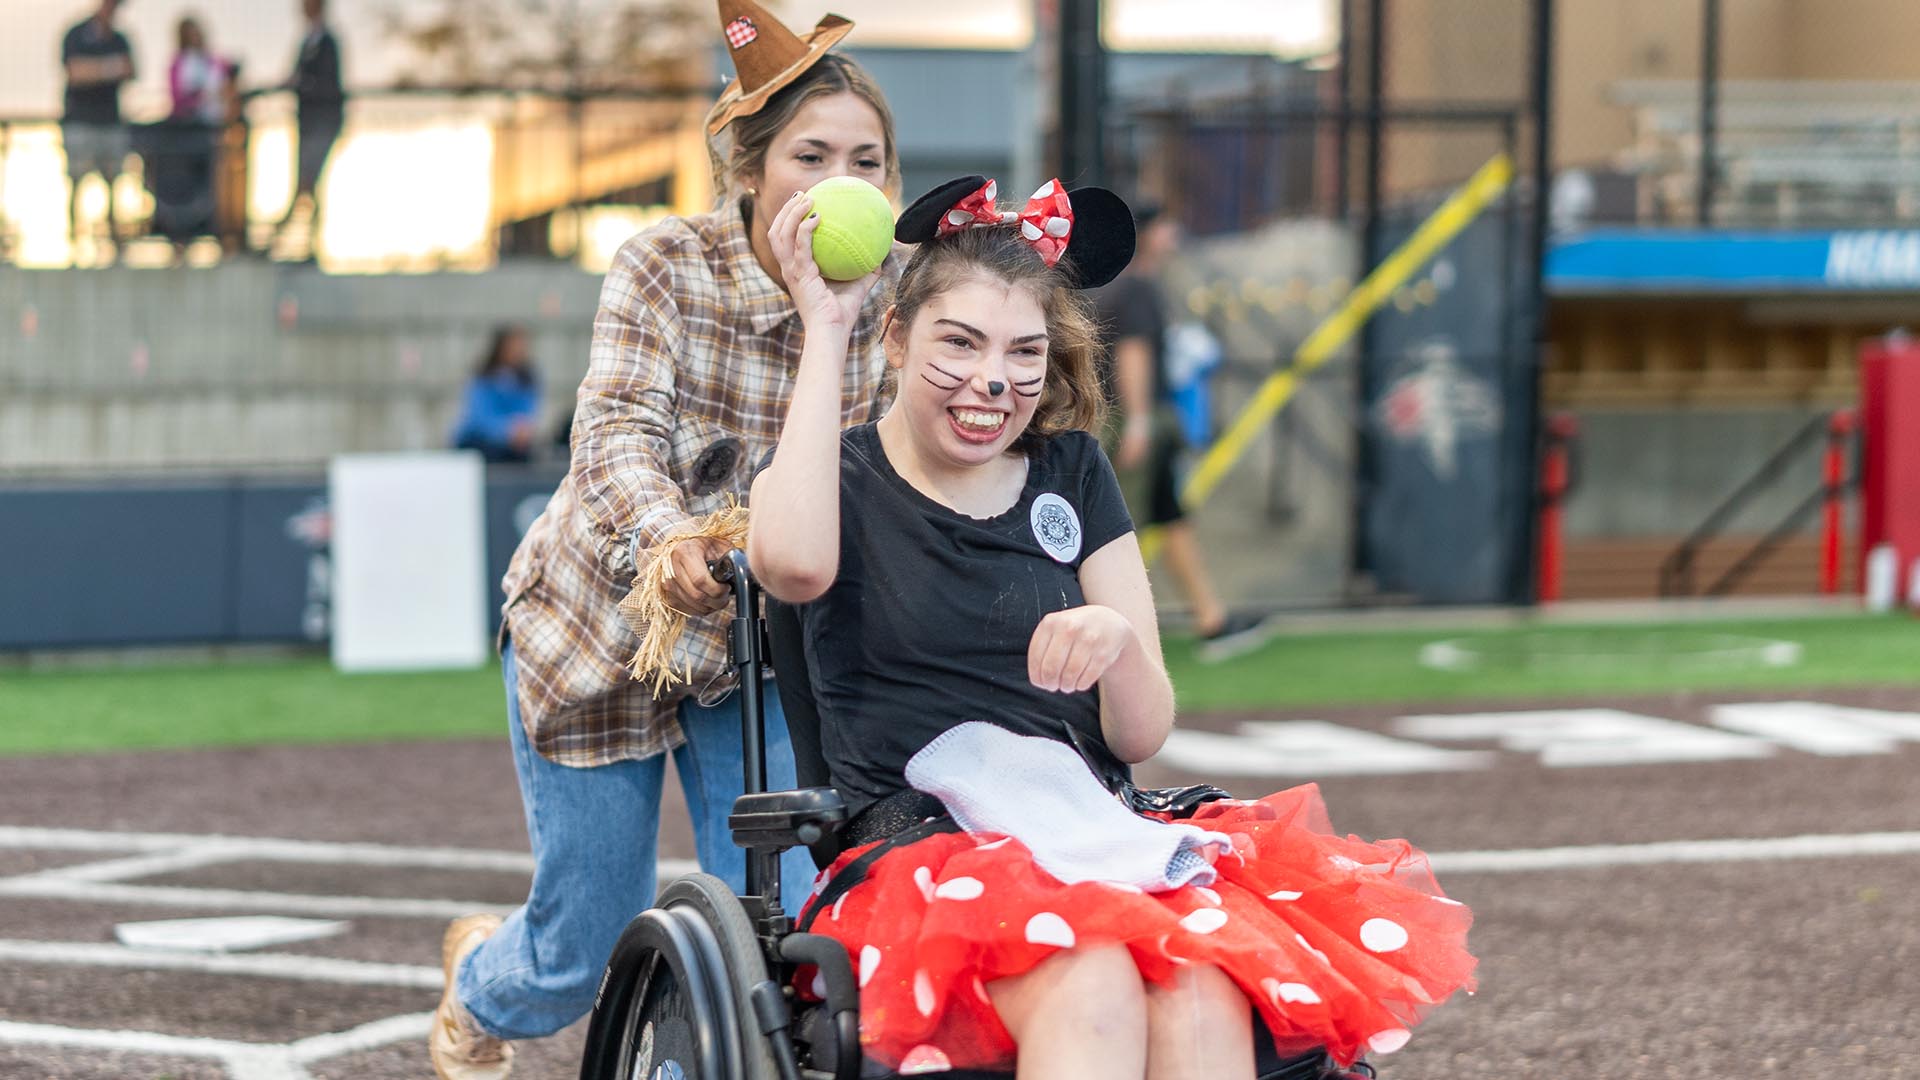 MSU Denver softball player Lexi Gephart and Miracle League player